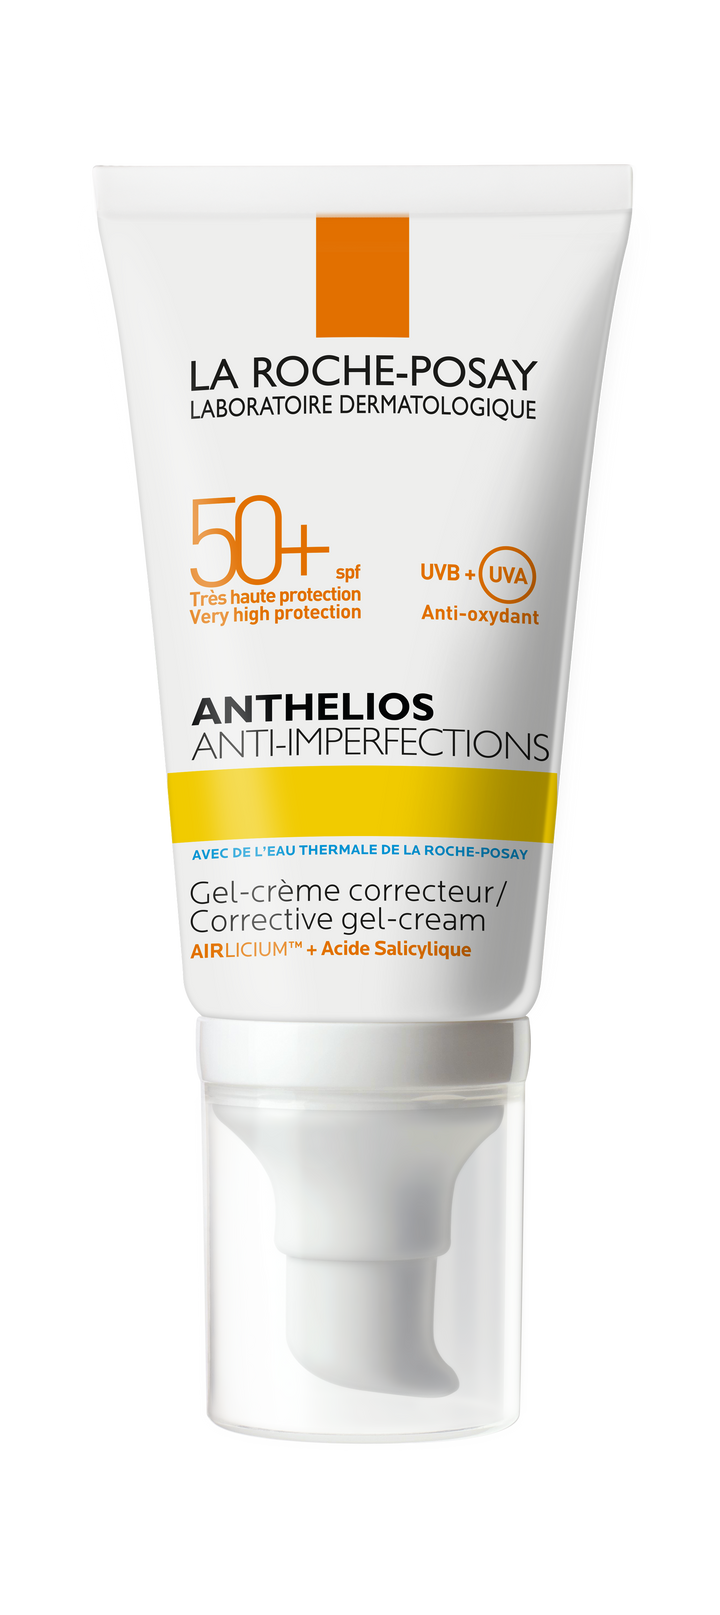 LRP Anthelios Anti-Imperfecties SPF50+ - SkinEffects Zwolle